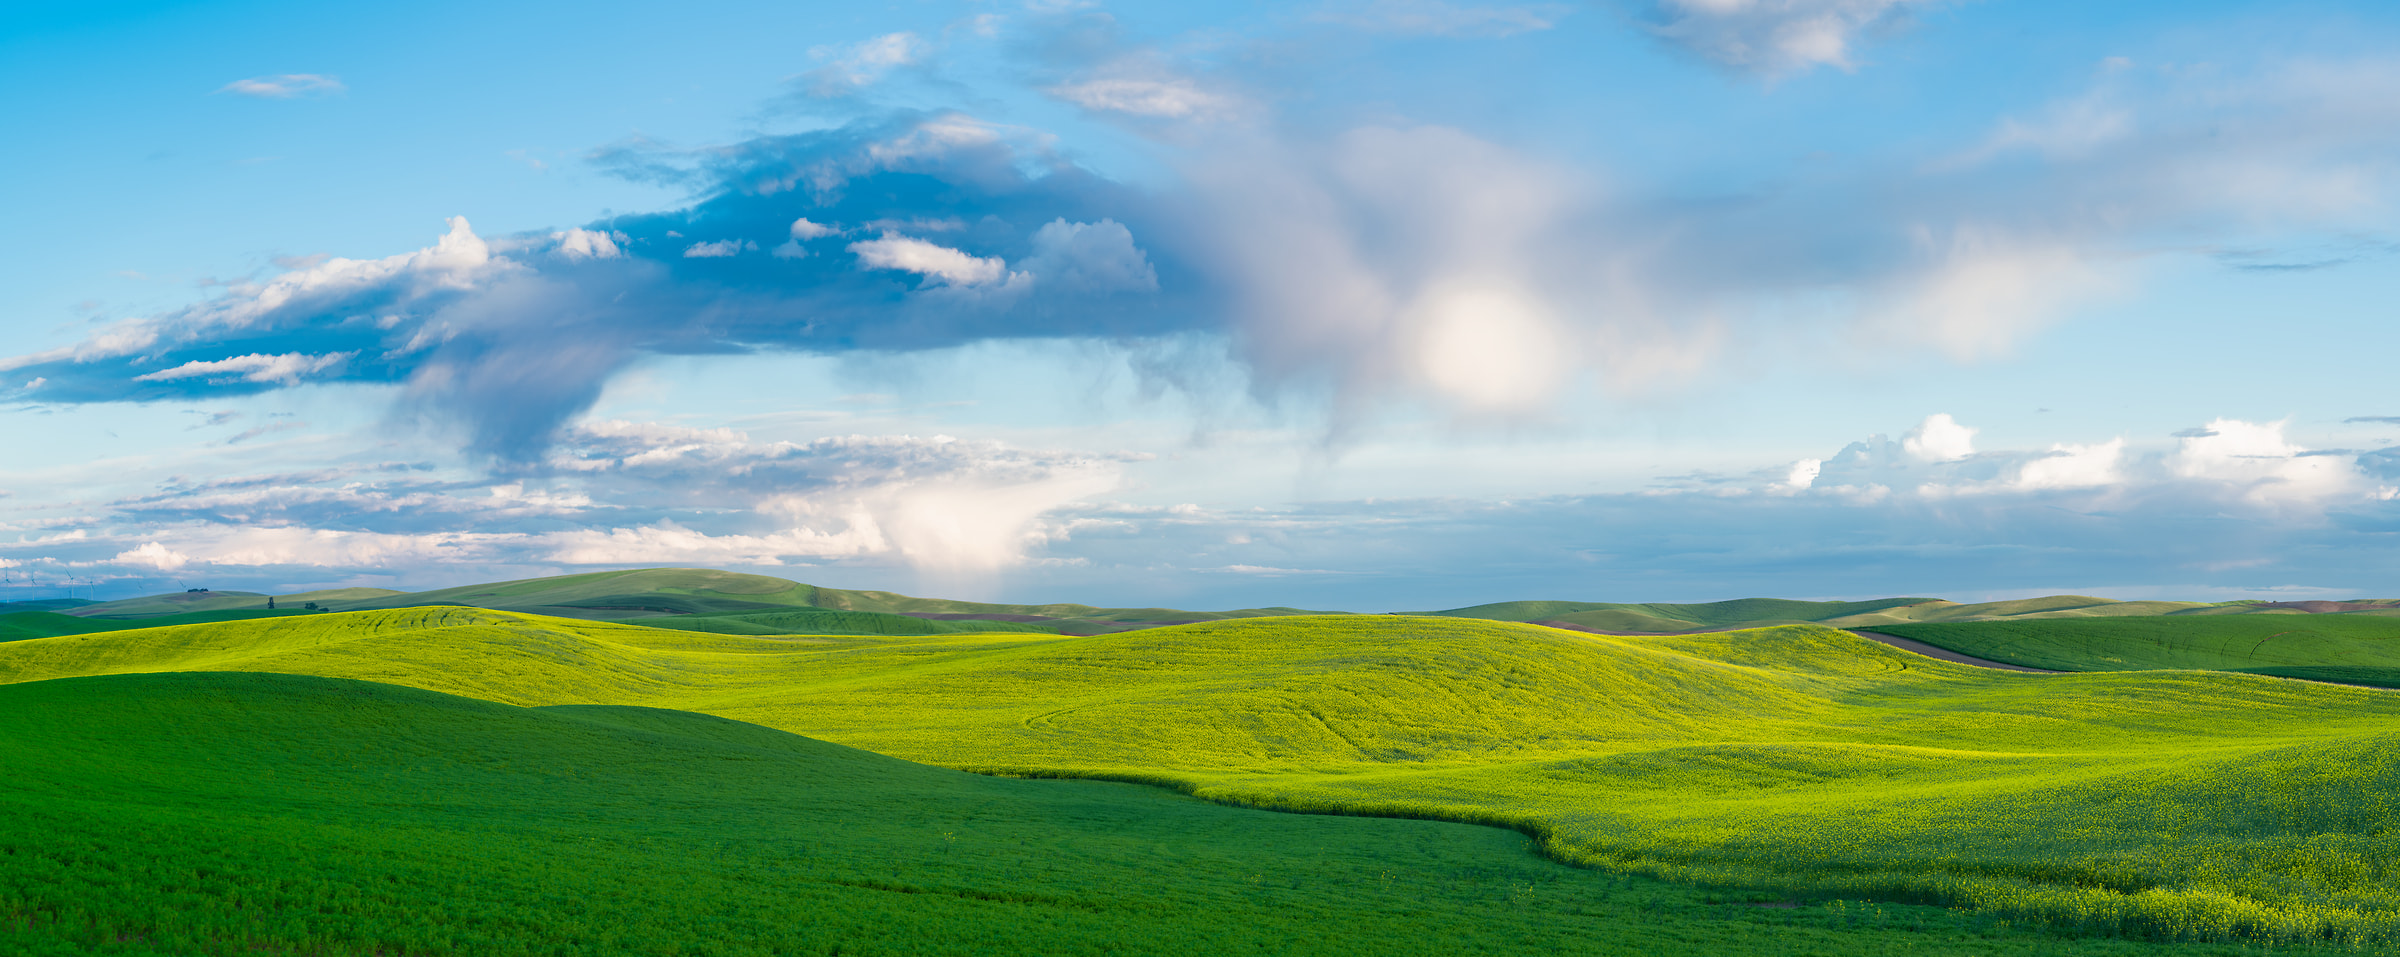 297 megapixels! A very high resolution, large-format VAST photo print of fields, hills, & clouds; landscape photograph created by Greg Probst in Steptoe Butte State Park, Washington